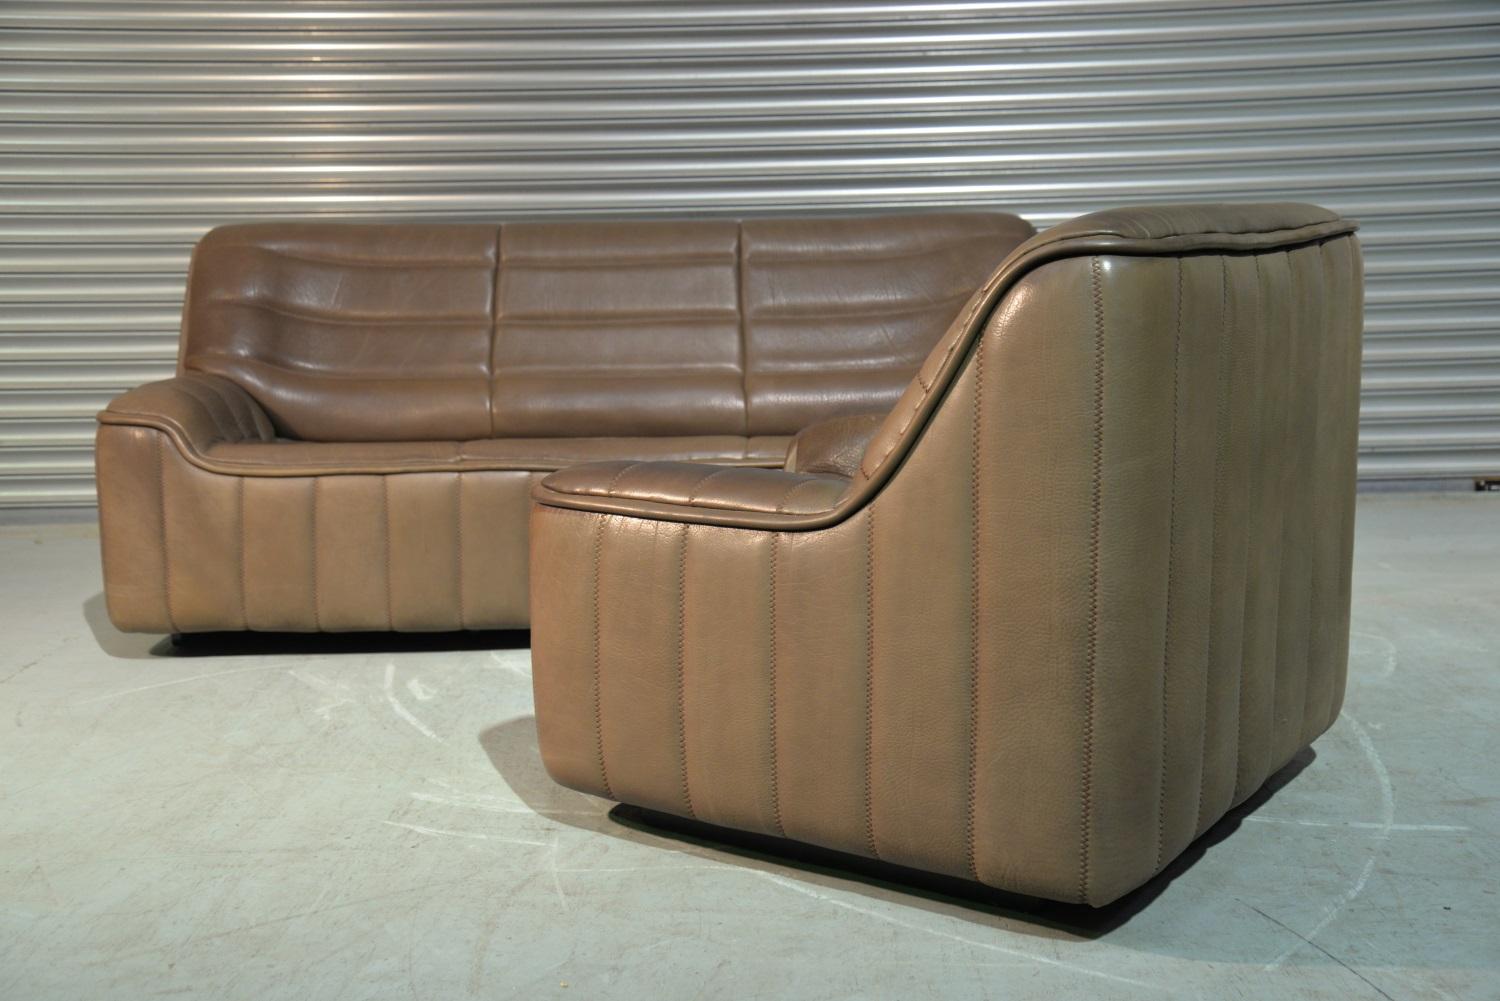 Late 20th Century Vintage Swiss De Sede Ds 84 Leather Sofa and Armchair, Switzerland, 1970s For Sale